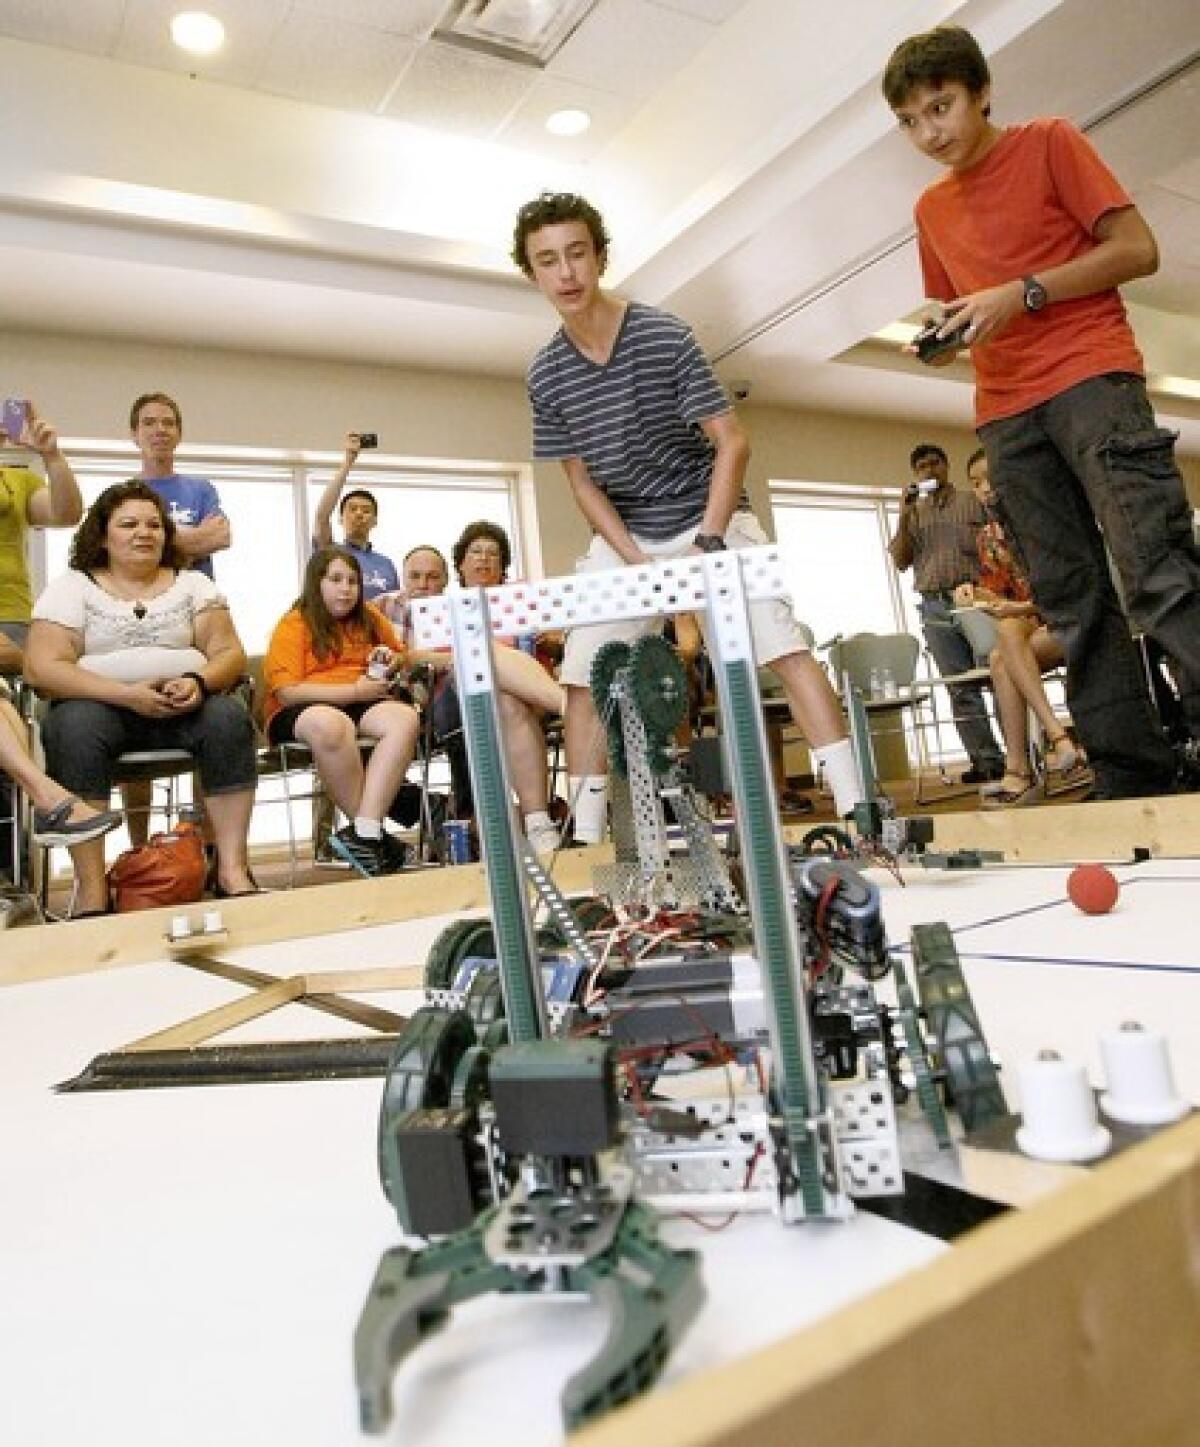 Clark Magnet High School student Alexander Luke, standing at left, works his remote controlled vehicle during Robotics Academy at Glendale Community College in Glendale on Thursday, June 27, 2013. Local students in 9th and 10th grade participated in the academy.